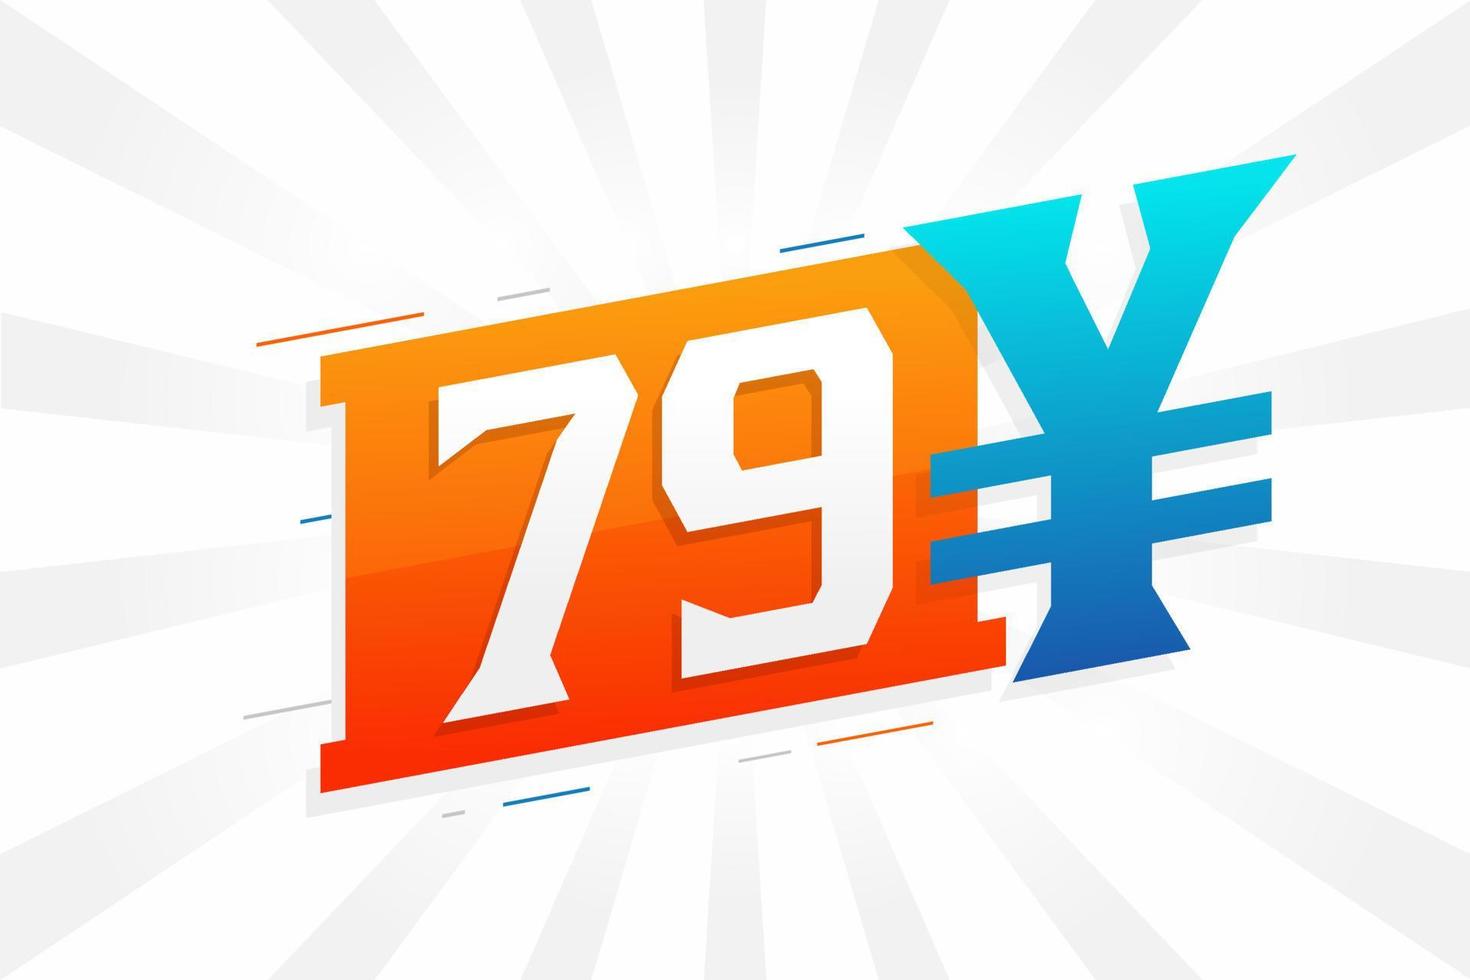 79 Yuan Chinese currency vector text symbol. 79 Yen Japanese currency Money stock vector